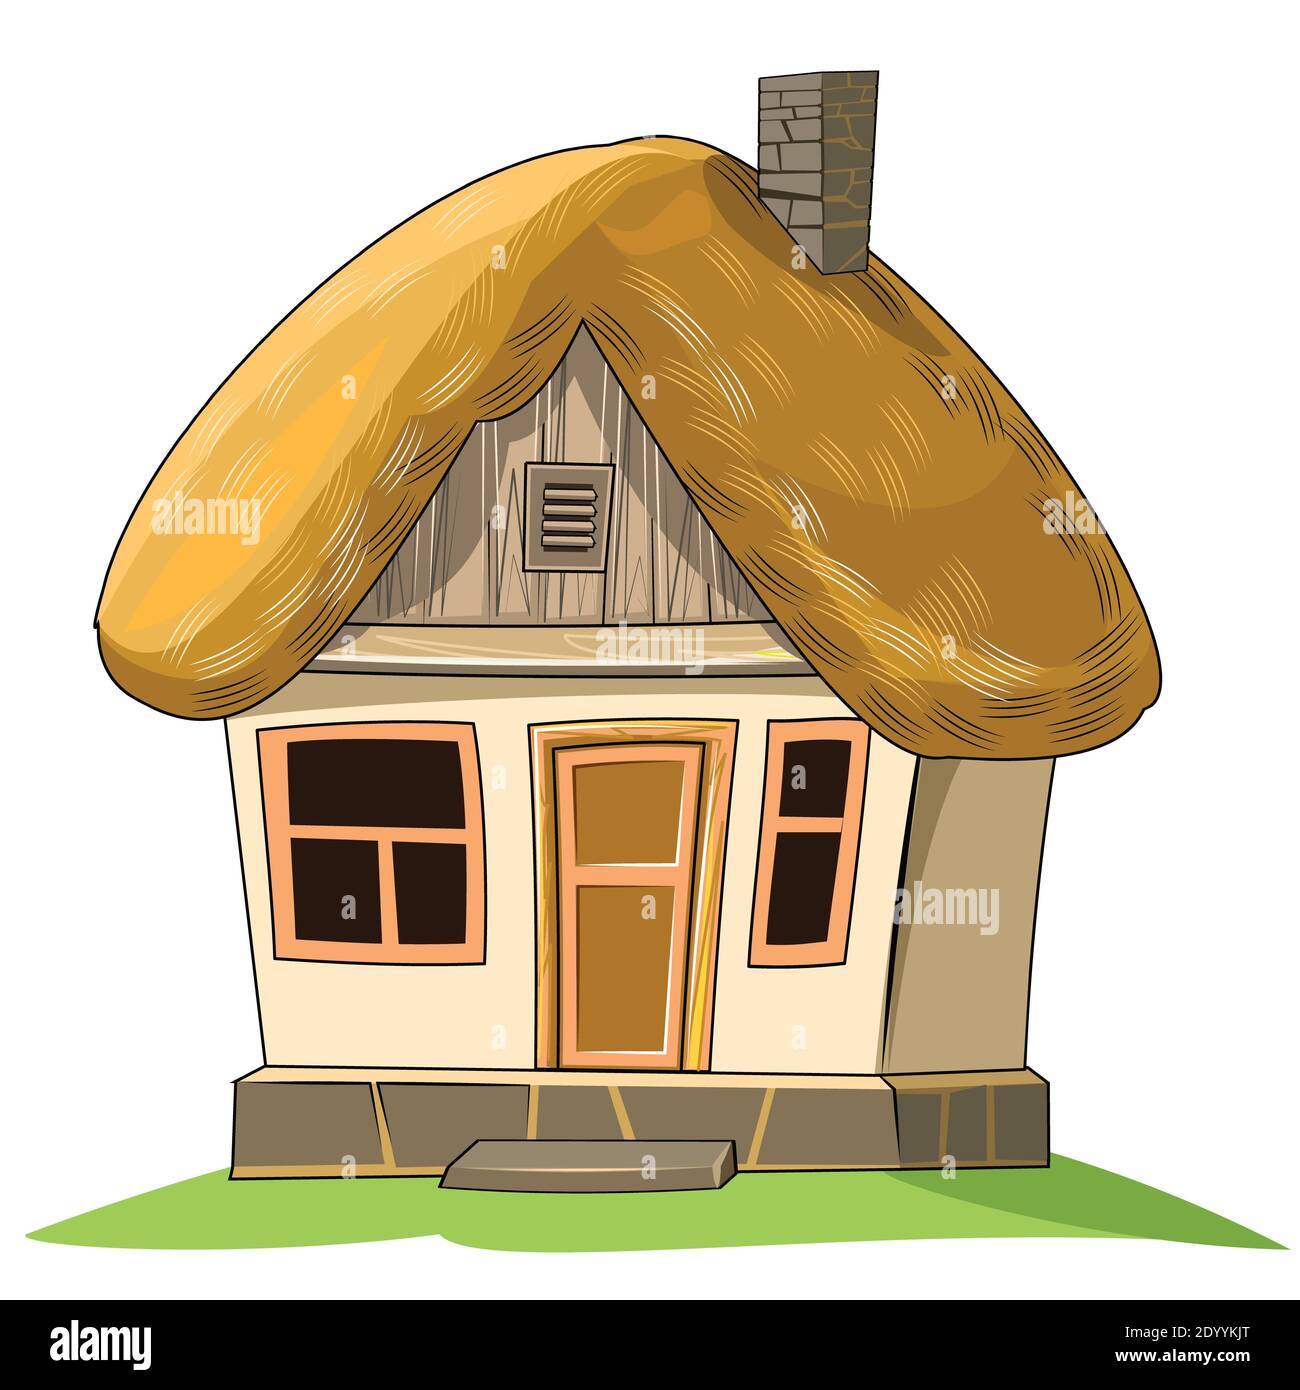 An old house with a thatched roof. Fabulous cartoon object. Cute childish style. An ancient dwelling. Tiny, small. Isolated on white. Stock Photo